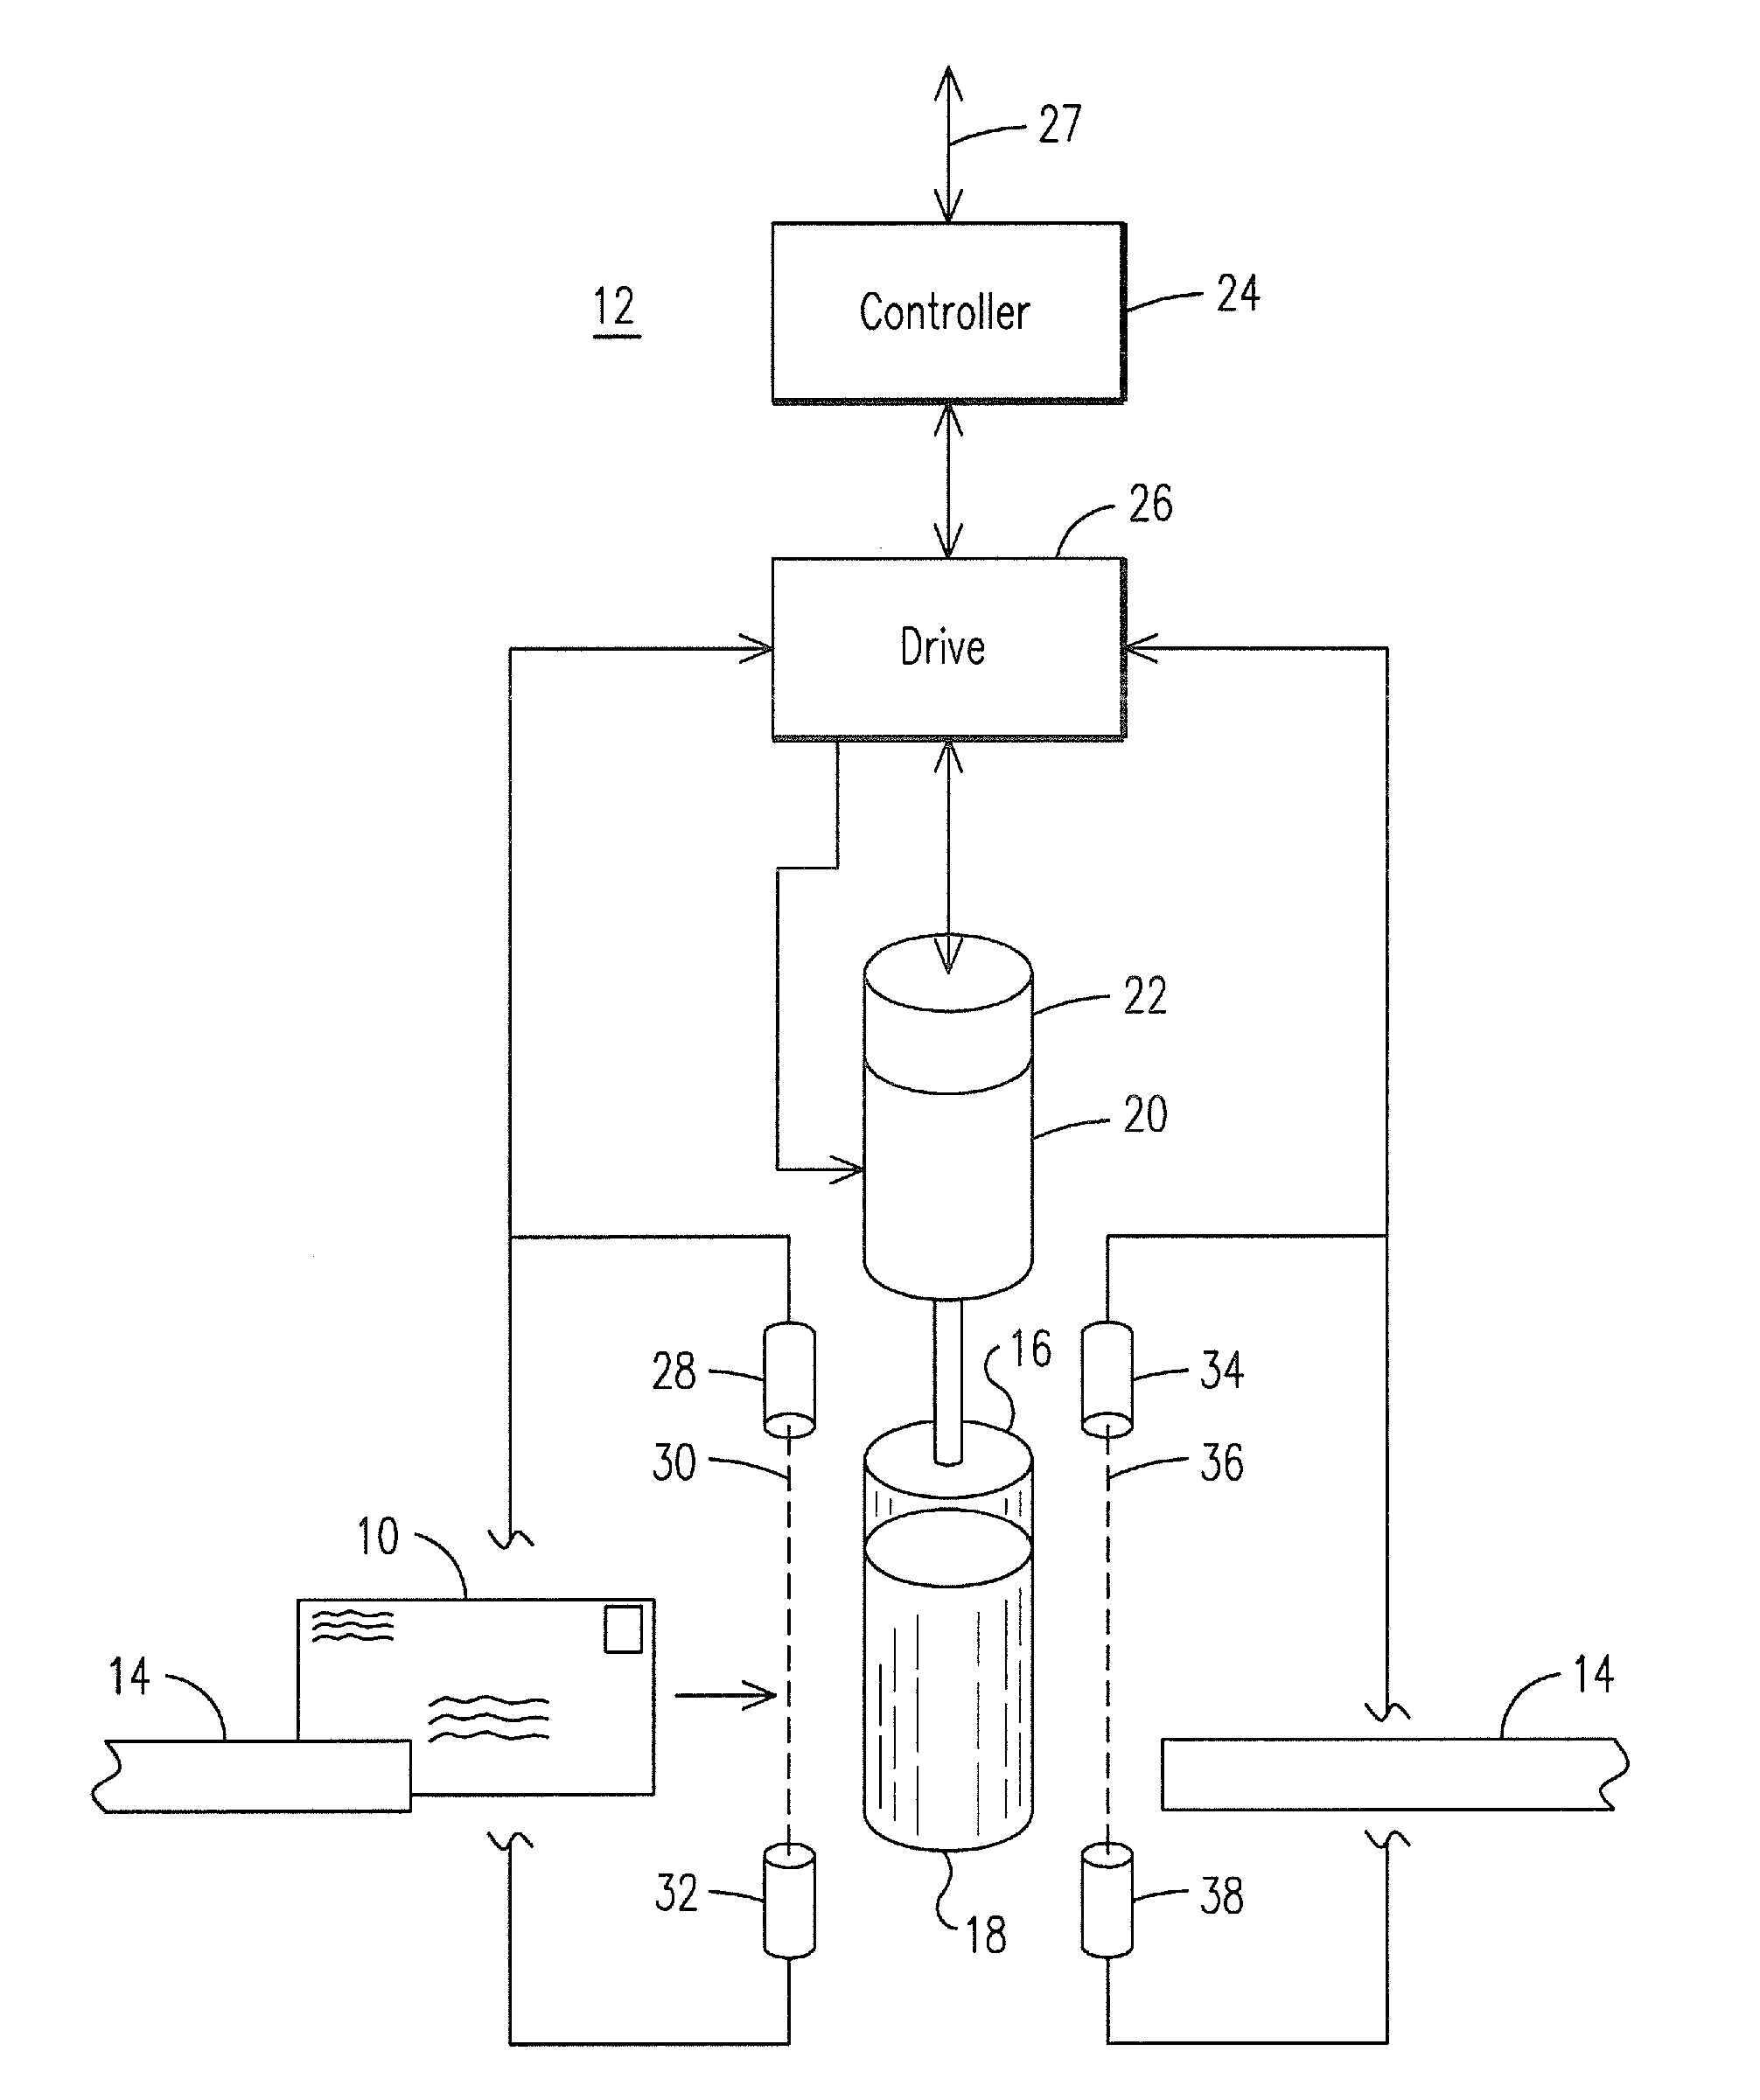 System for determining the mass of an item in motion